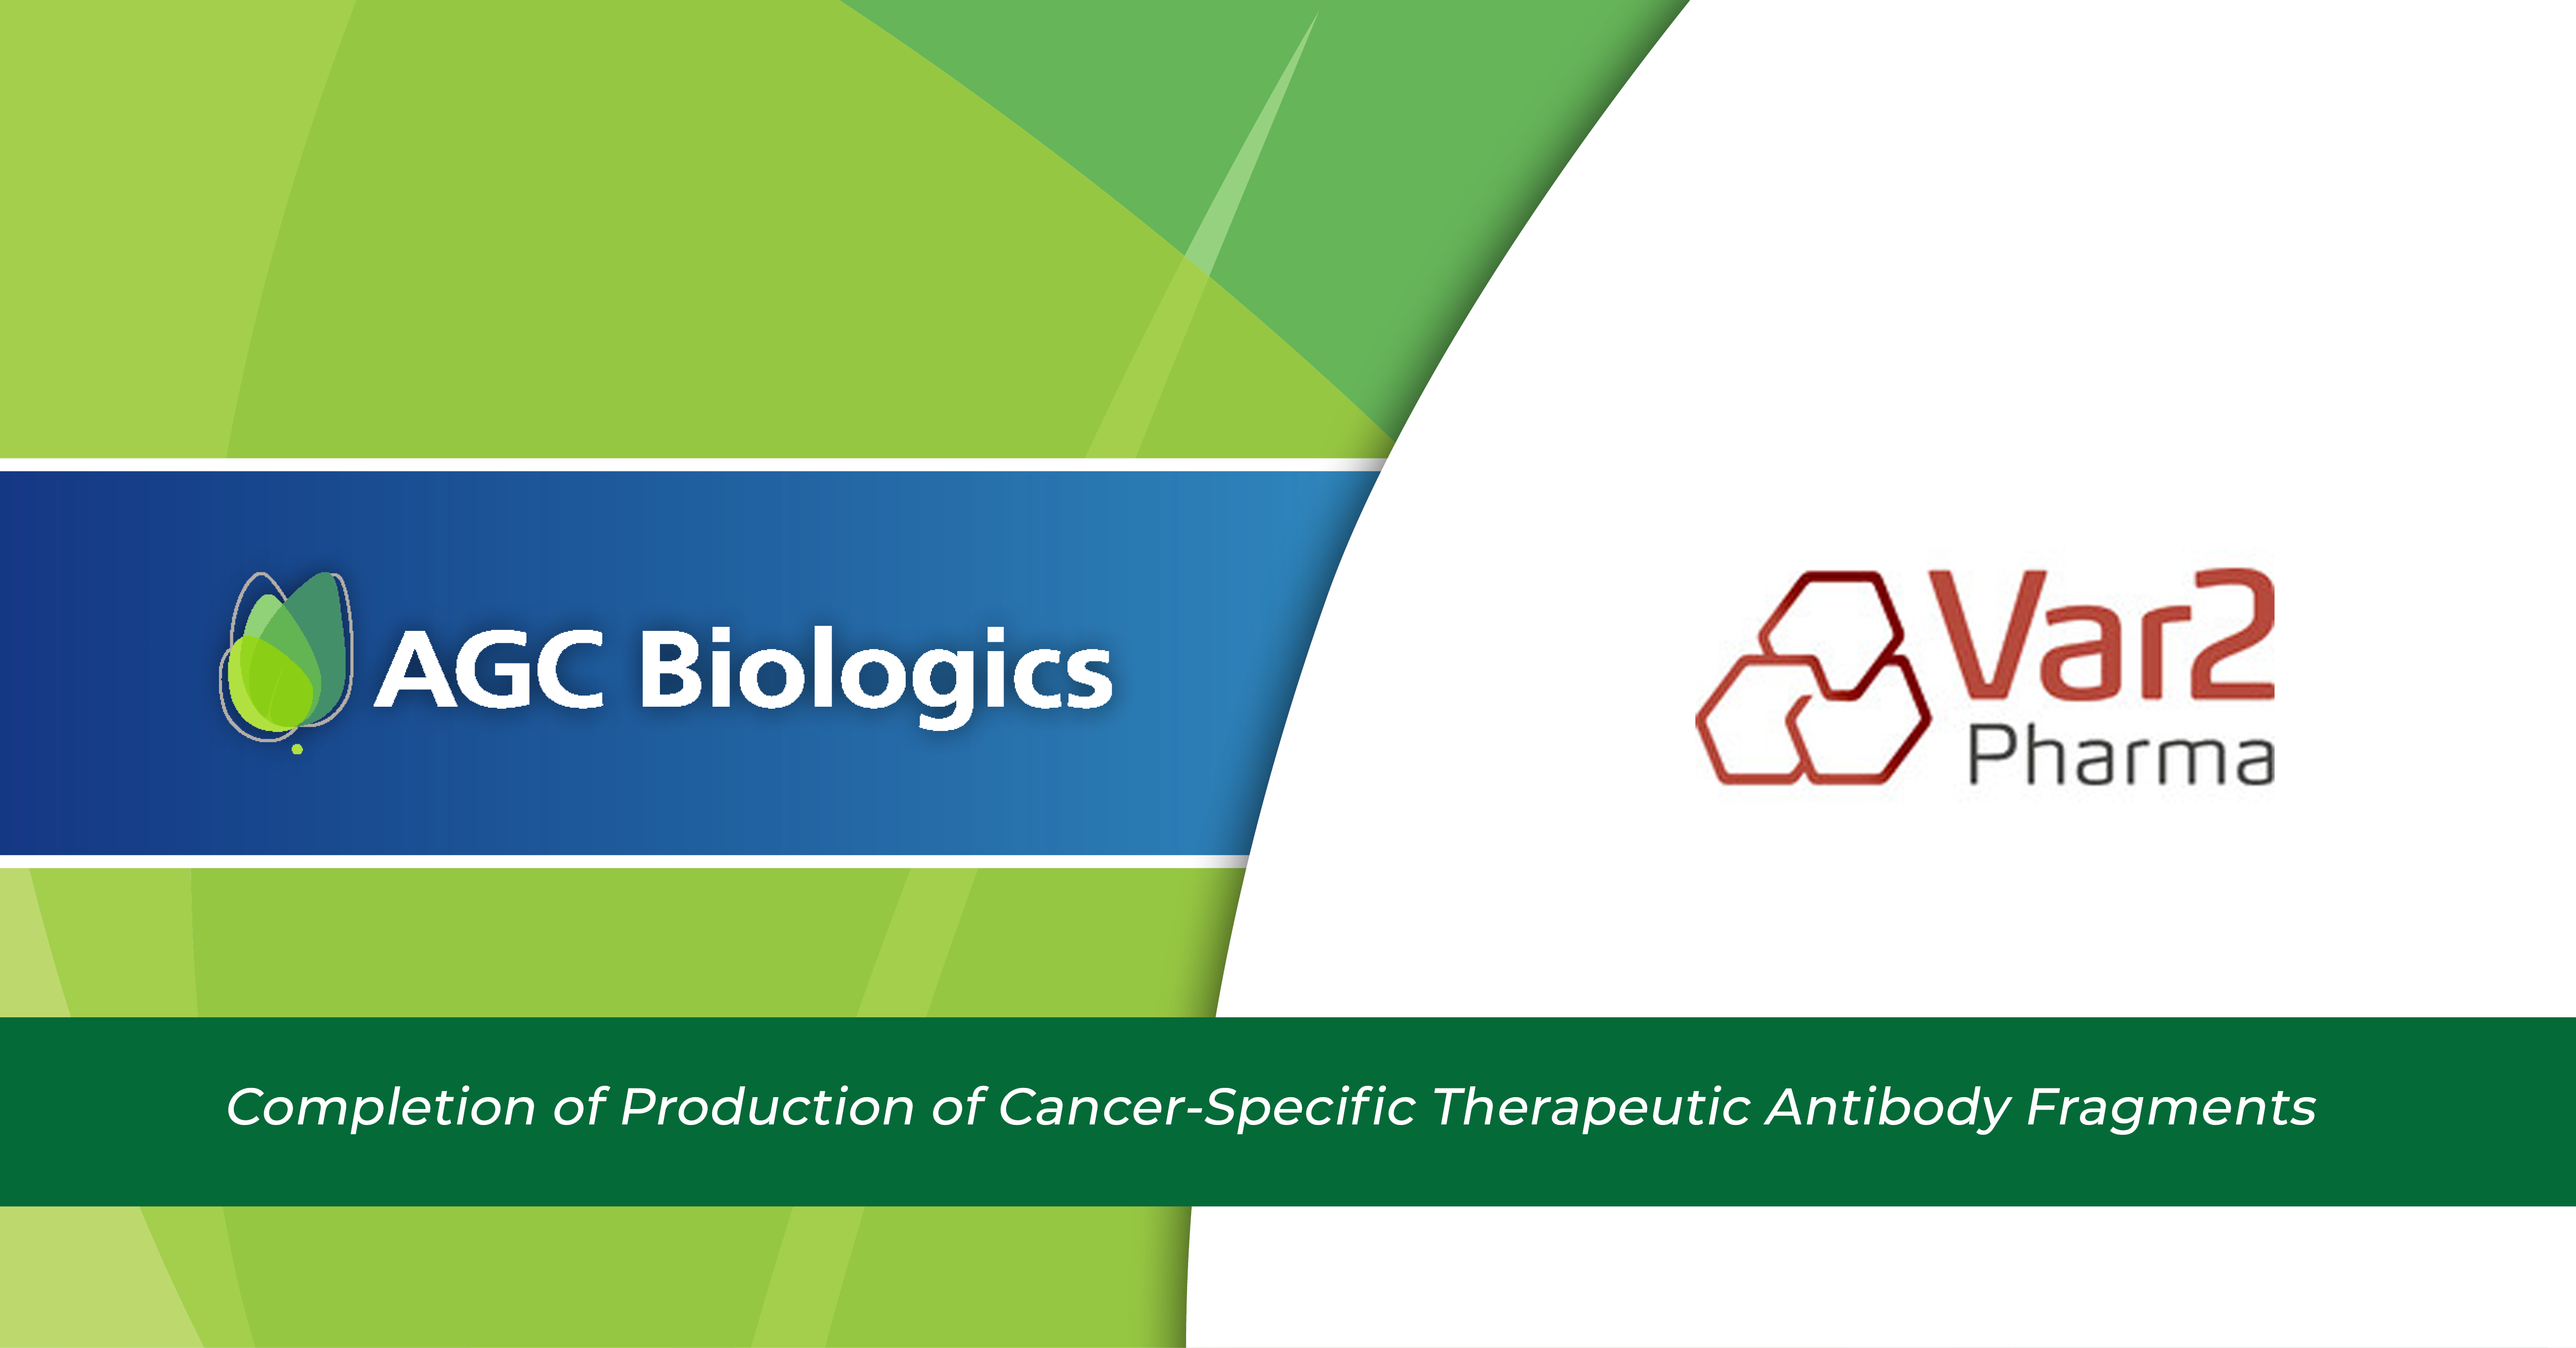 AGC Biologics and VAR2 Pharmaceuticals Completion of antibody late stage clinical work